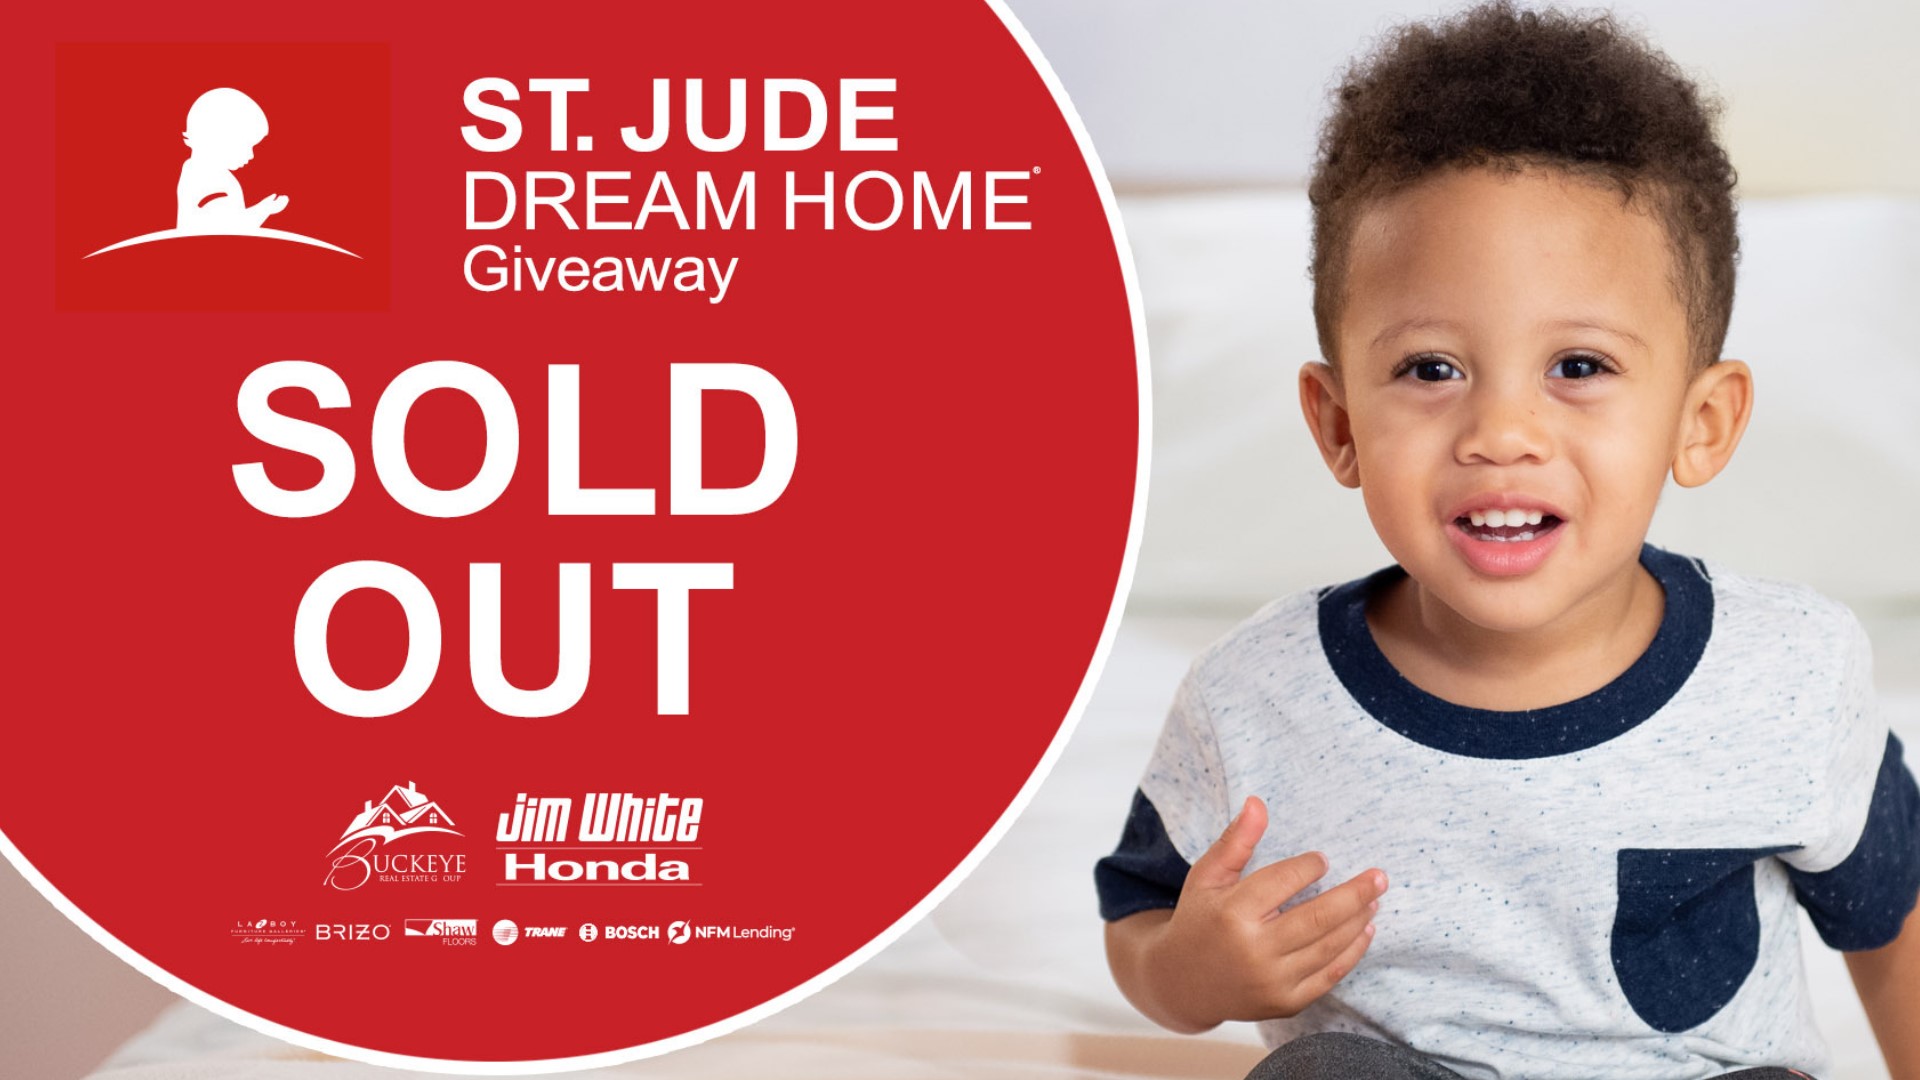 With your help, the St. Jude Dream Home Giveaway raised $1.6 million to help St. Jude Children's Research Hospital continue the mission of ending childhood cancer.